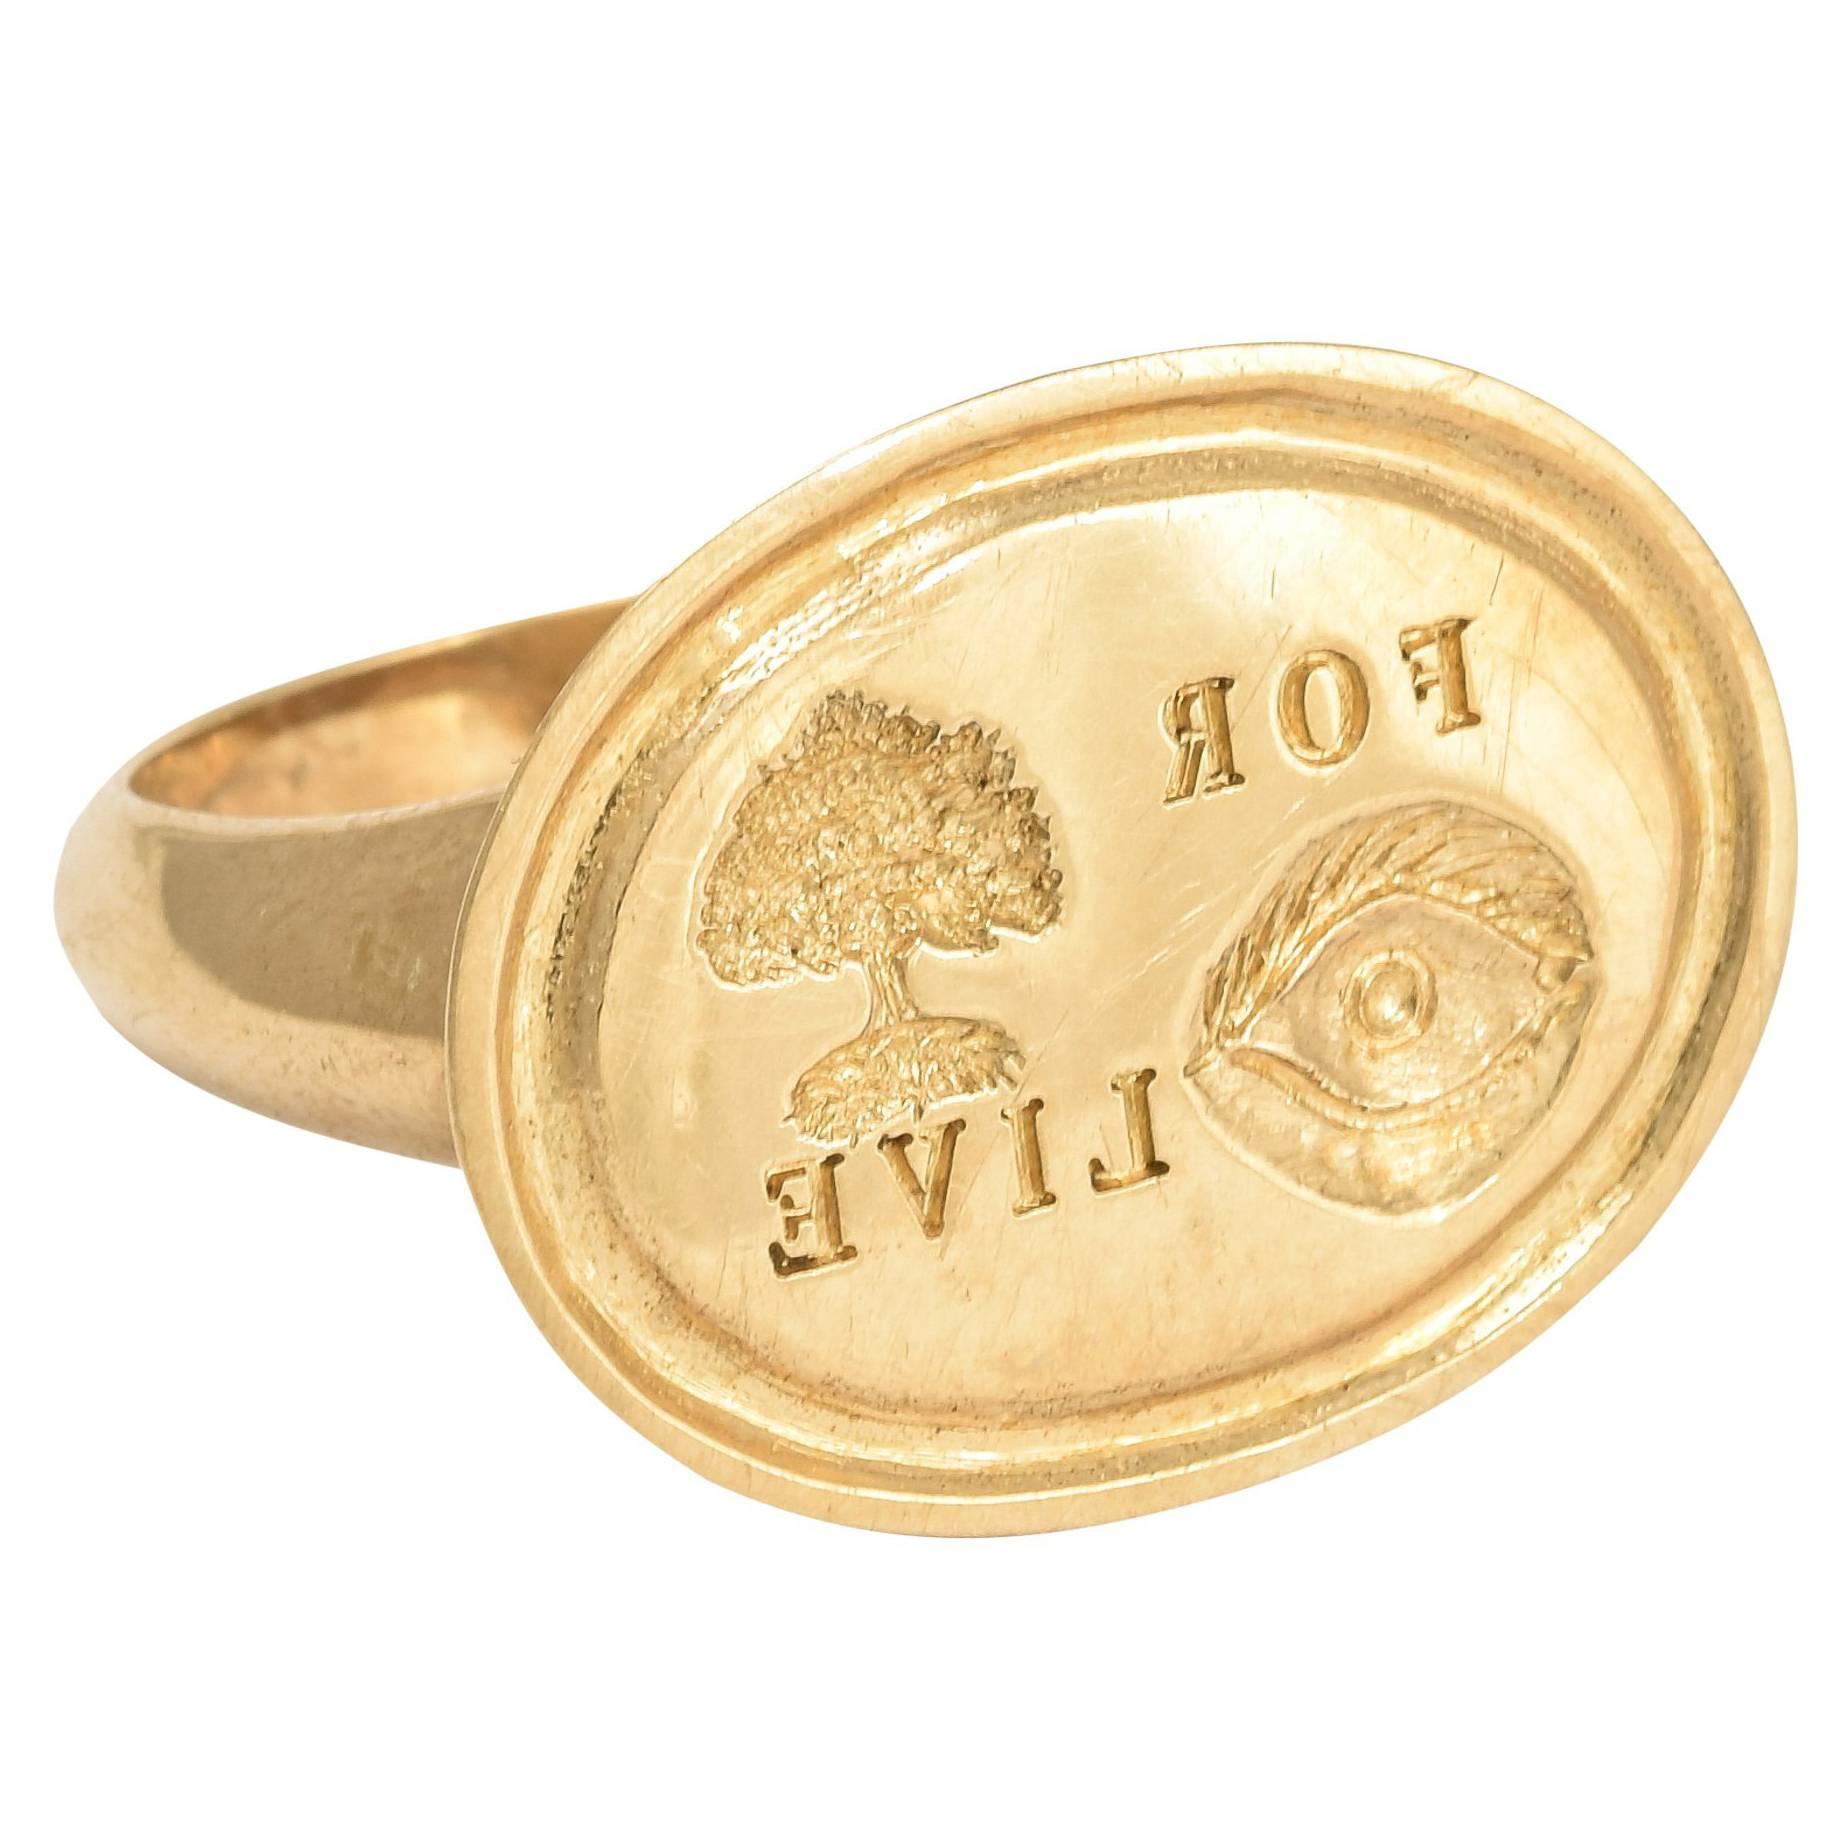 Rebus Puzzle "For You I Live" Gold Signet Ring